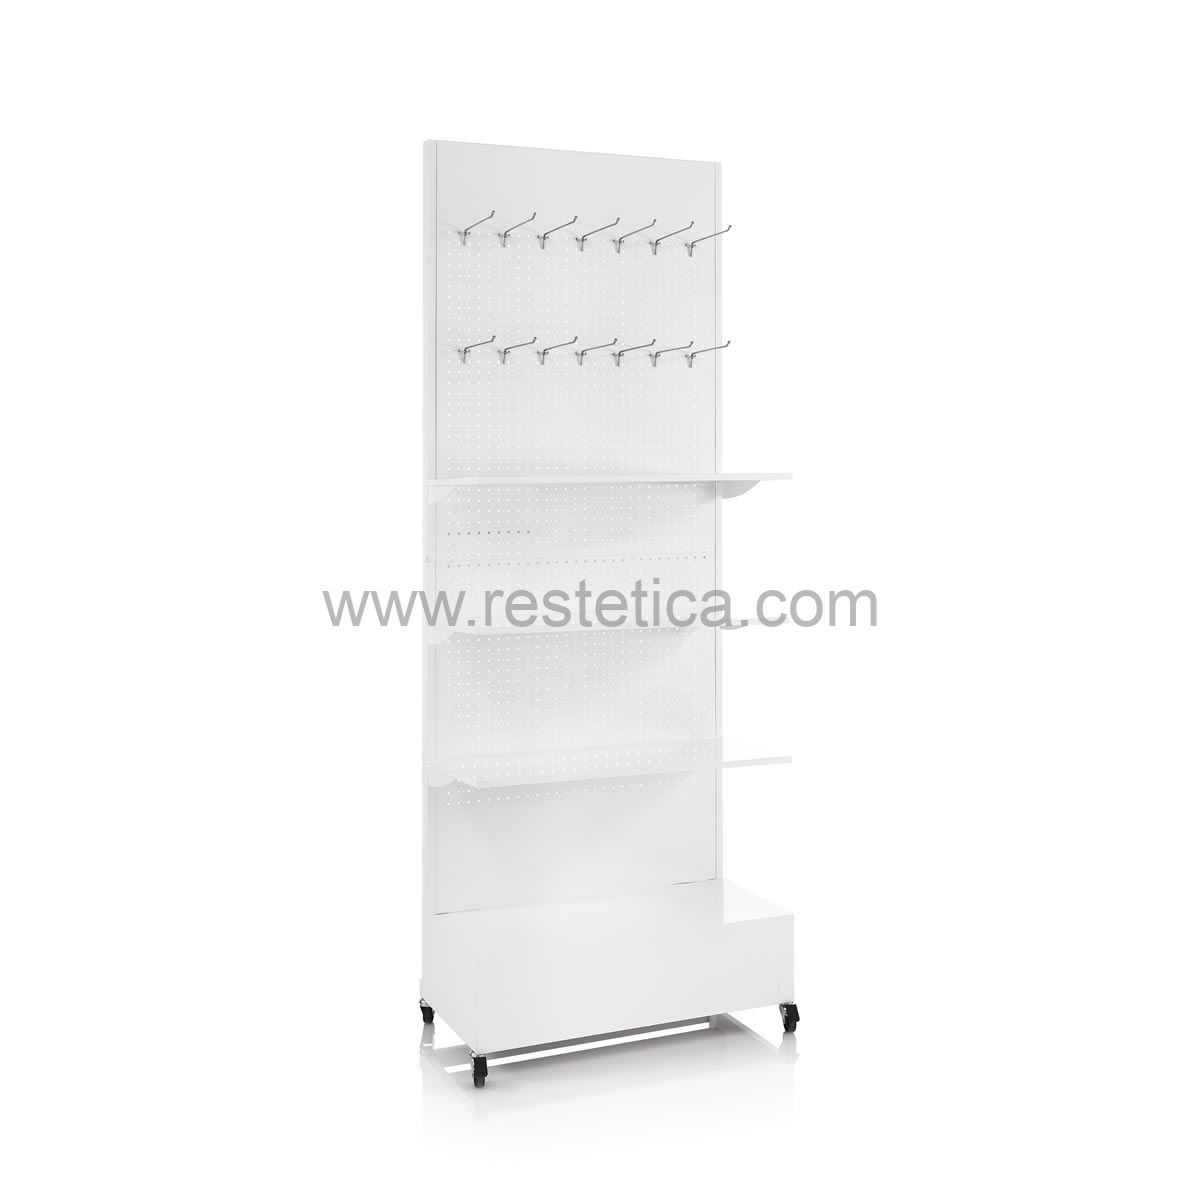 Multi-use wall display products with 4 wheels and 3 wide shelves with price strips